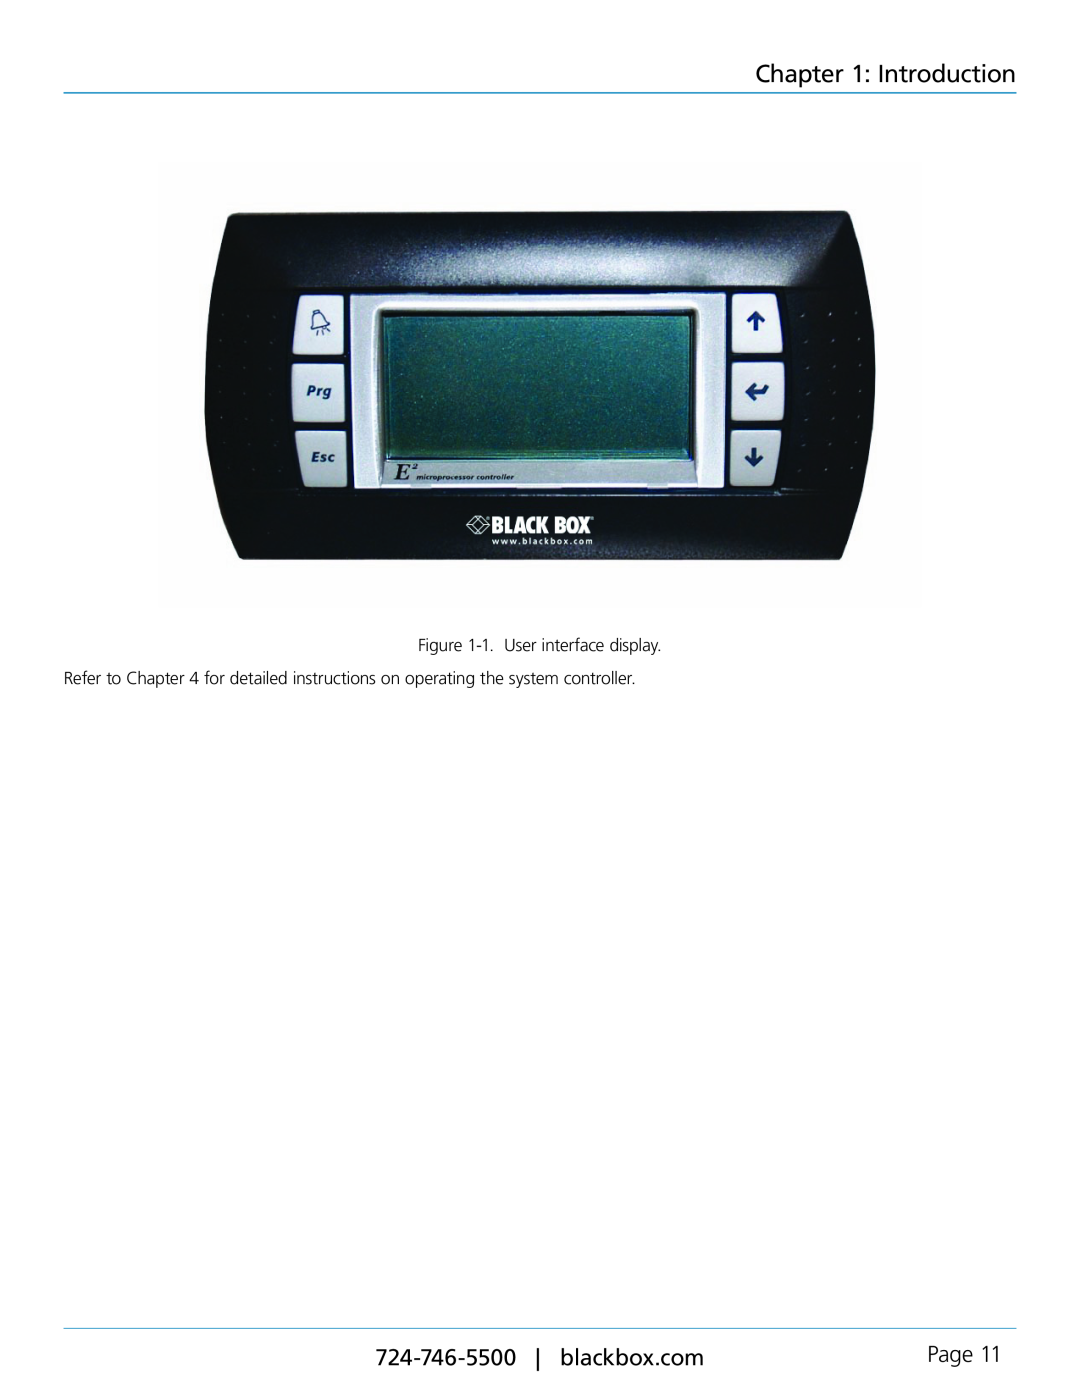 Black Box CRDX-G-FS-12KW, CRDX-W-FS-12KW, CRDX-A-FS-24KW, CRDX-G-FS-24KW Introduction, Page, 1. User interface display 